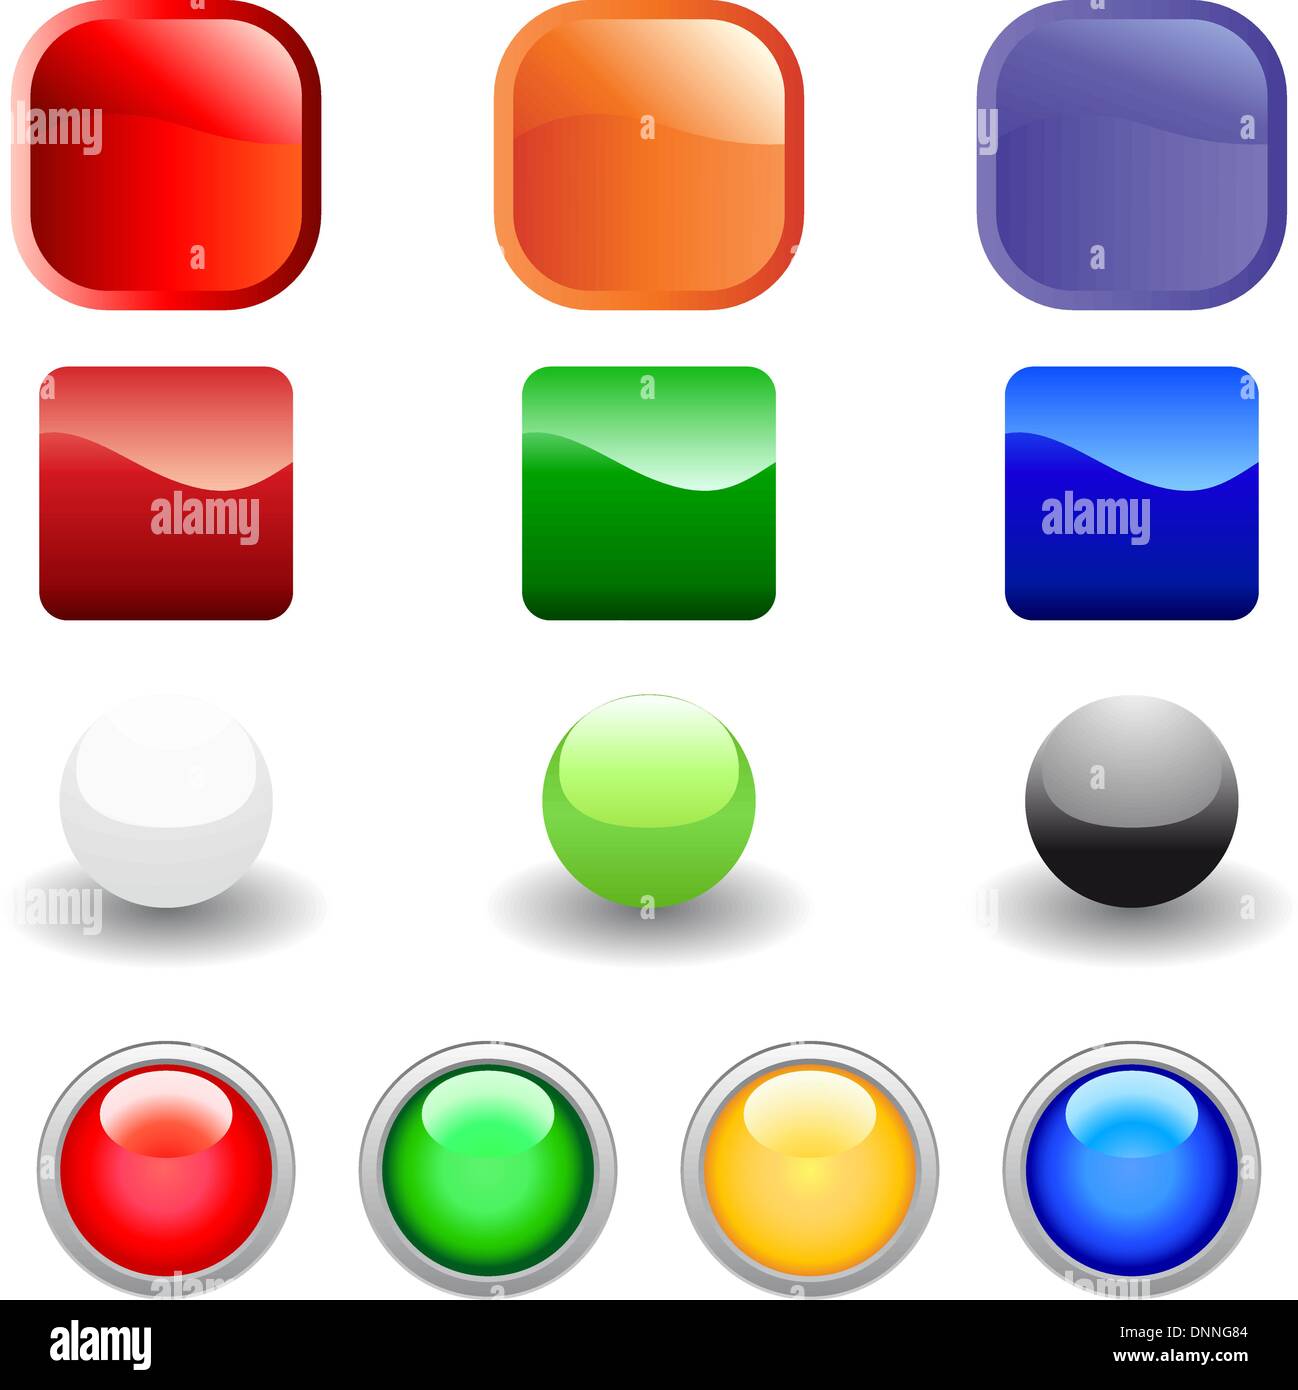 Set of glossy vector internet buttons for web design use Stock Vector